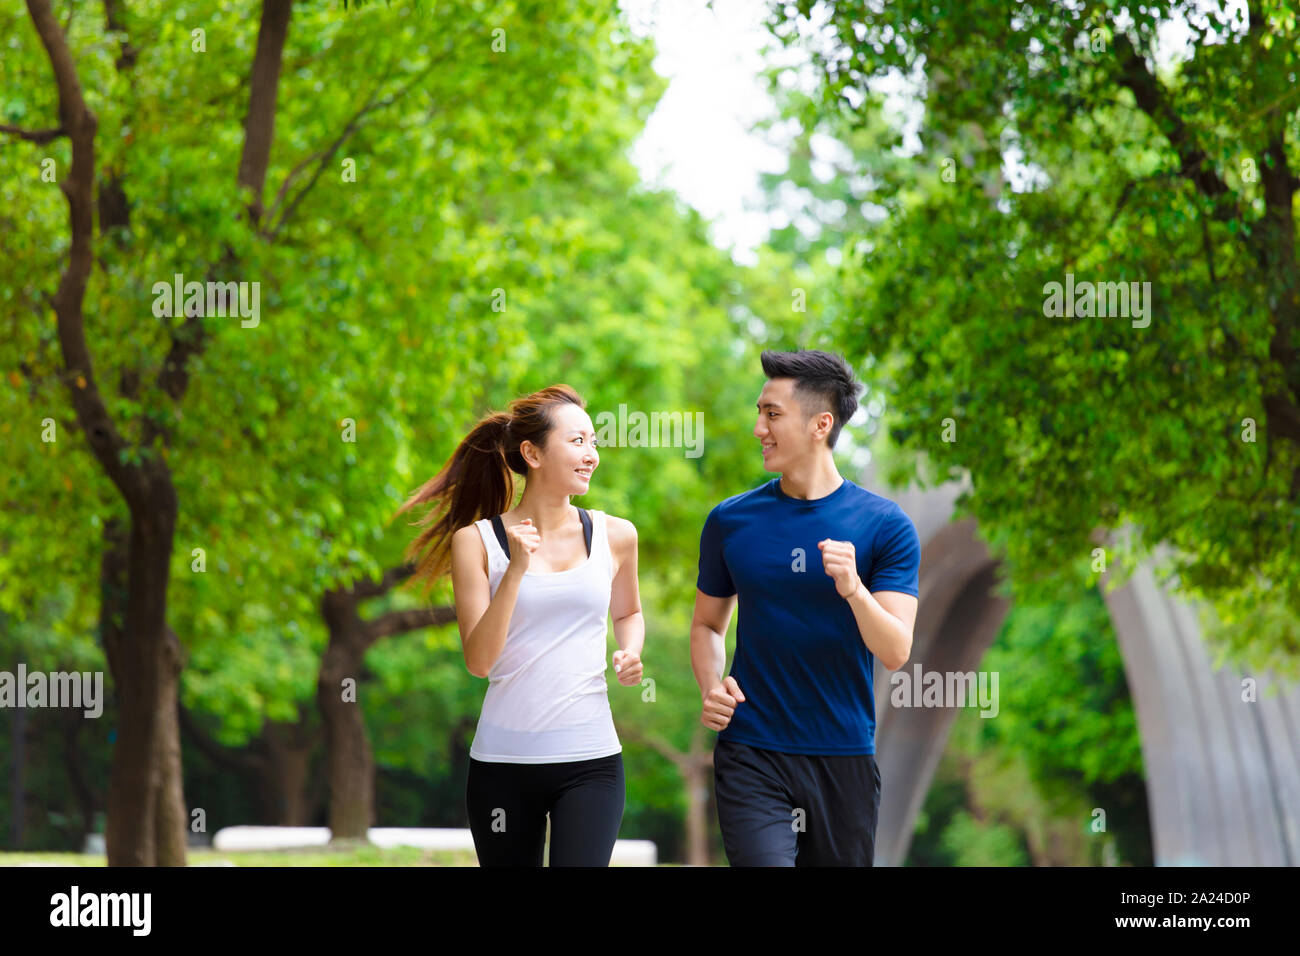 Happy young Couple jogging et running in park Banque D'Images